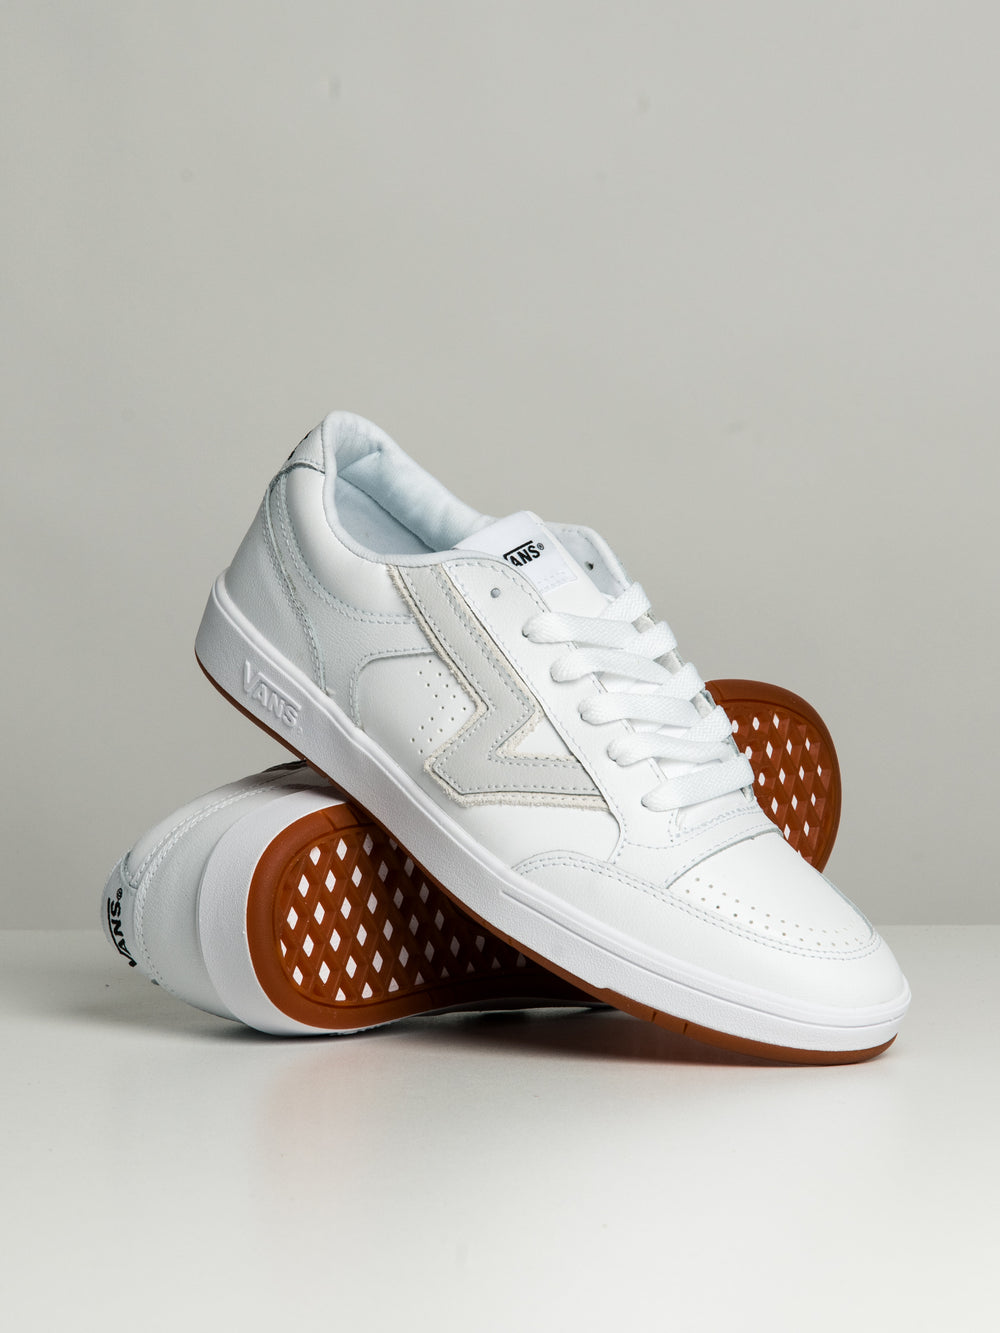 MENS VANS LOWLAND CC LEATHER SNEAKER - CLEARANCE